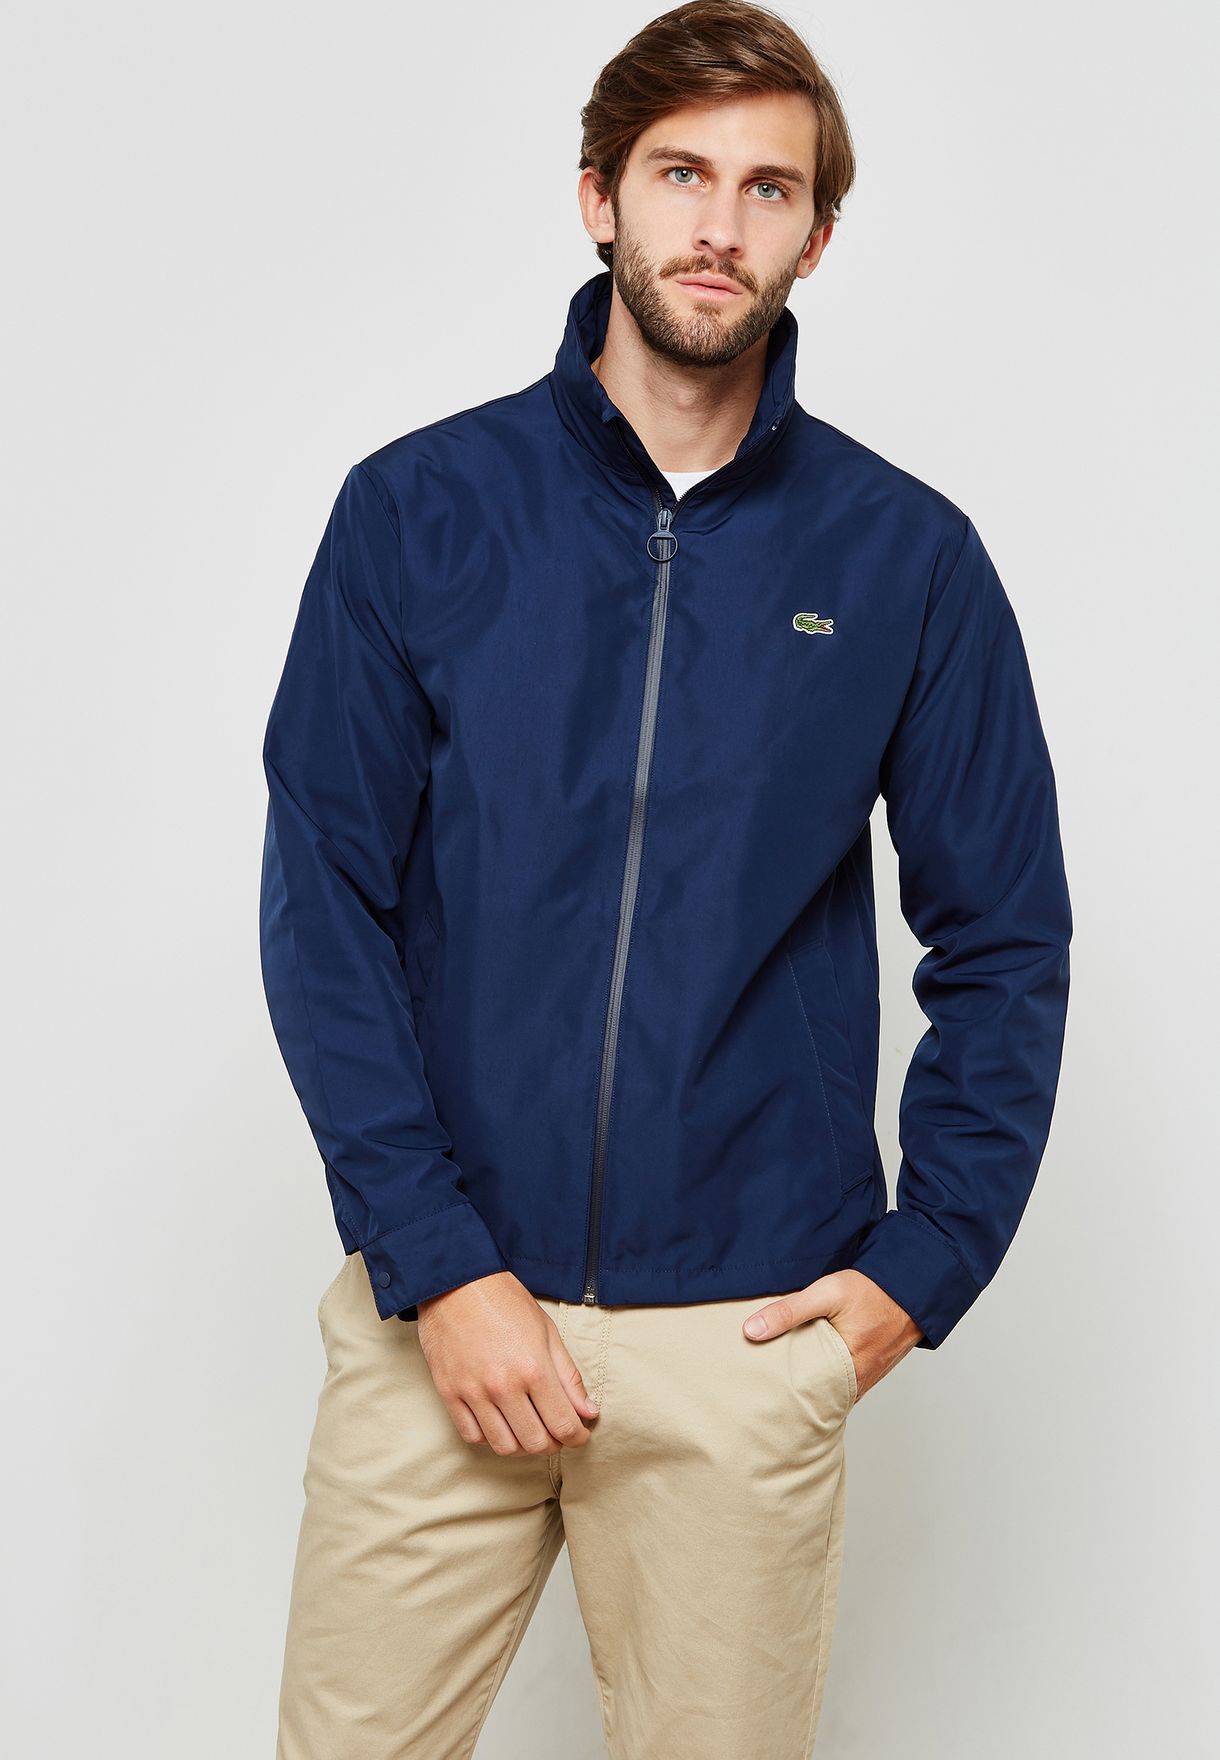 Buy Lacoste navy Essential Jacket for 